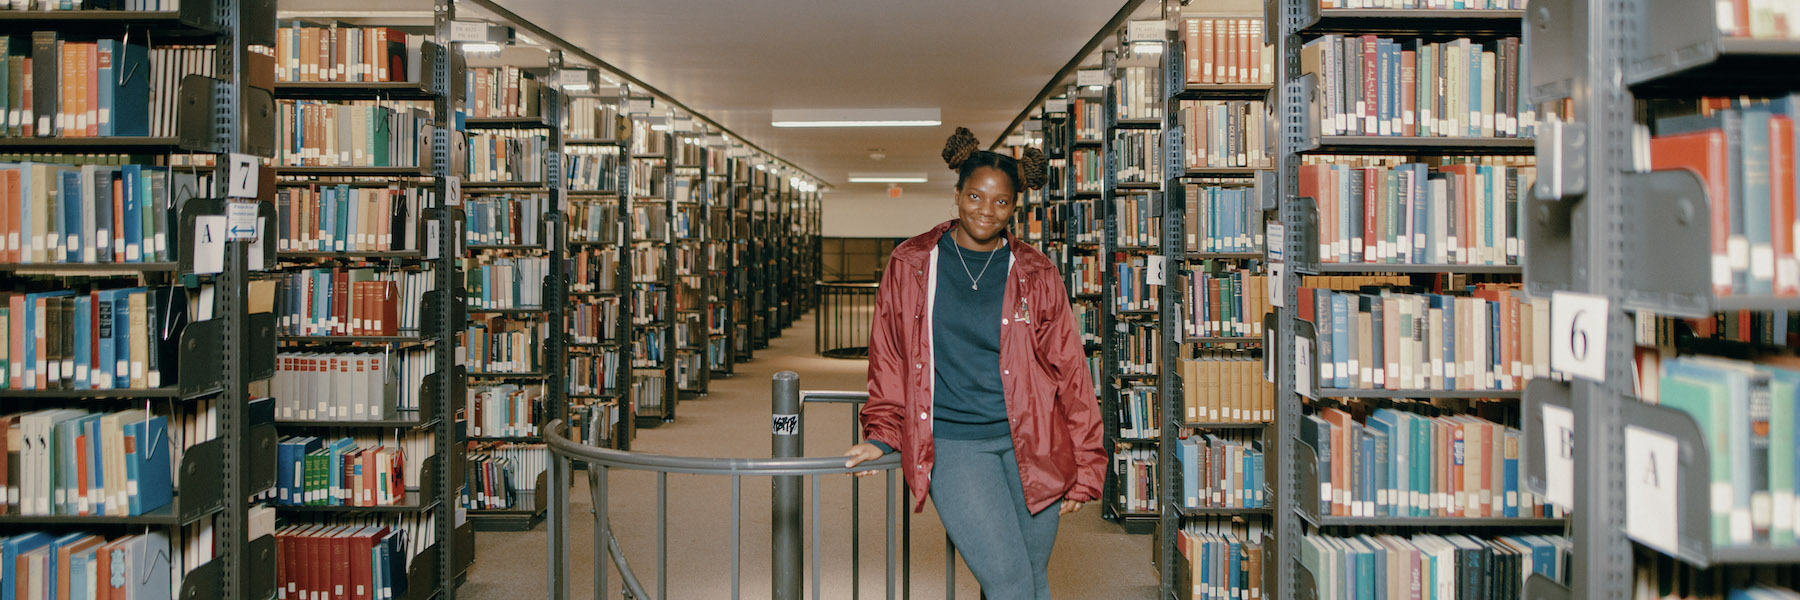 Student standing in library stacks